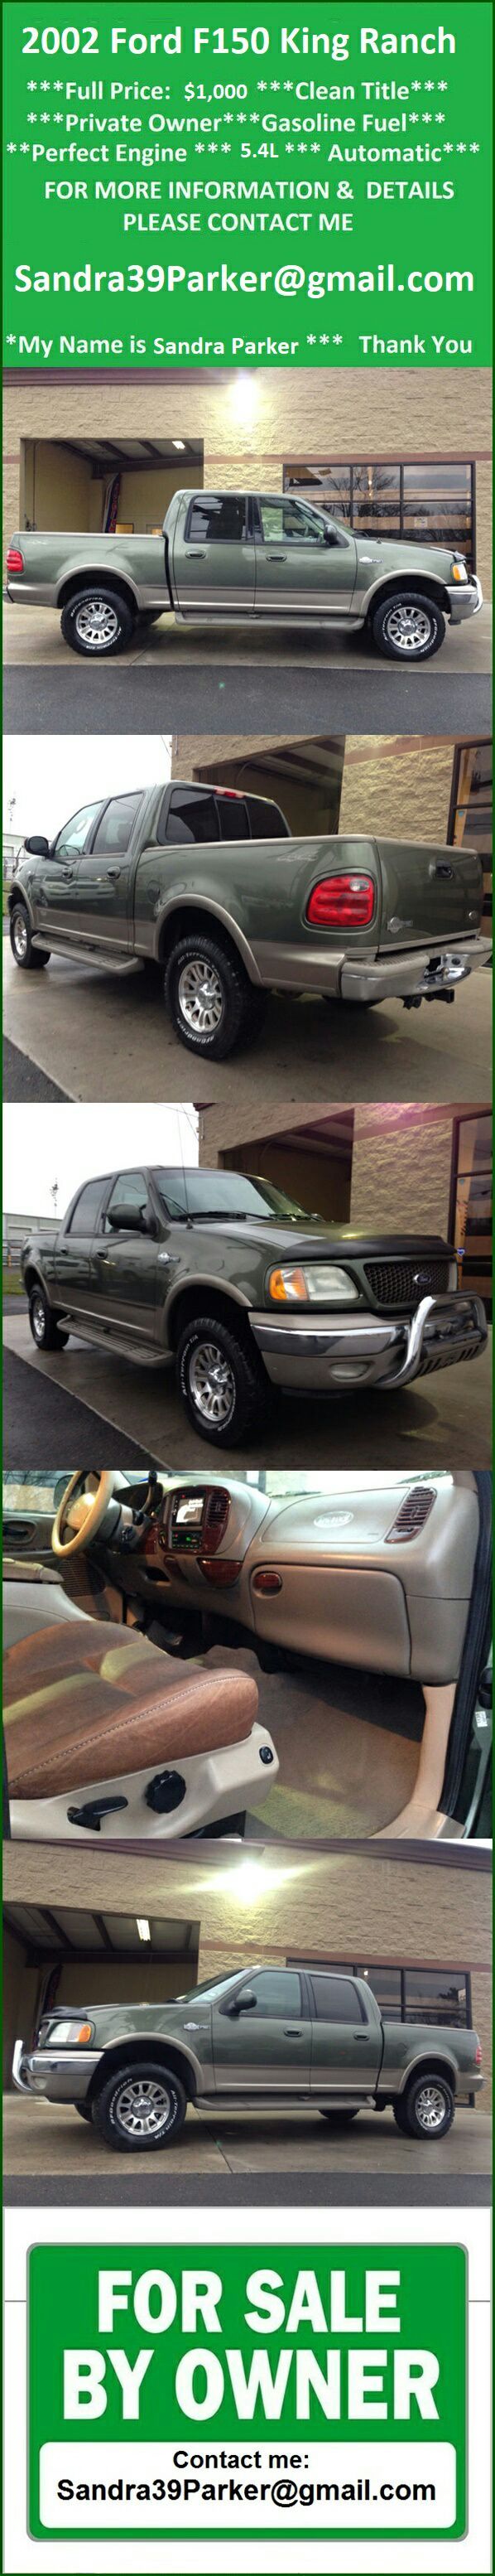 2002 Ford F-150 King Ranch VERY-LOW MILES!!! CLEAN!!!!